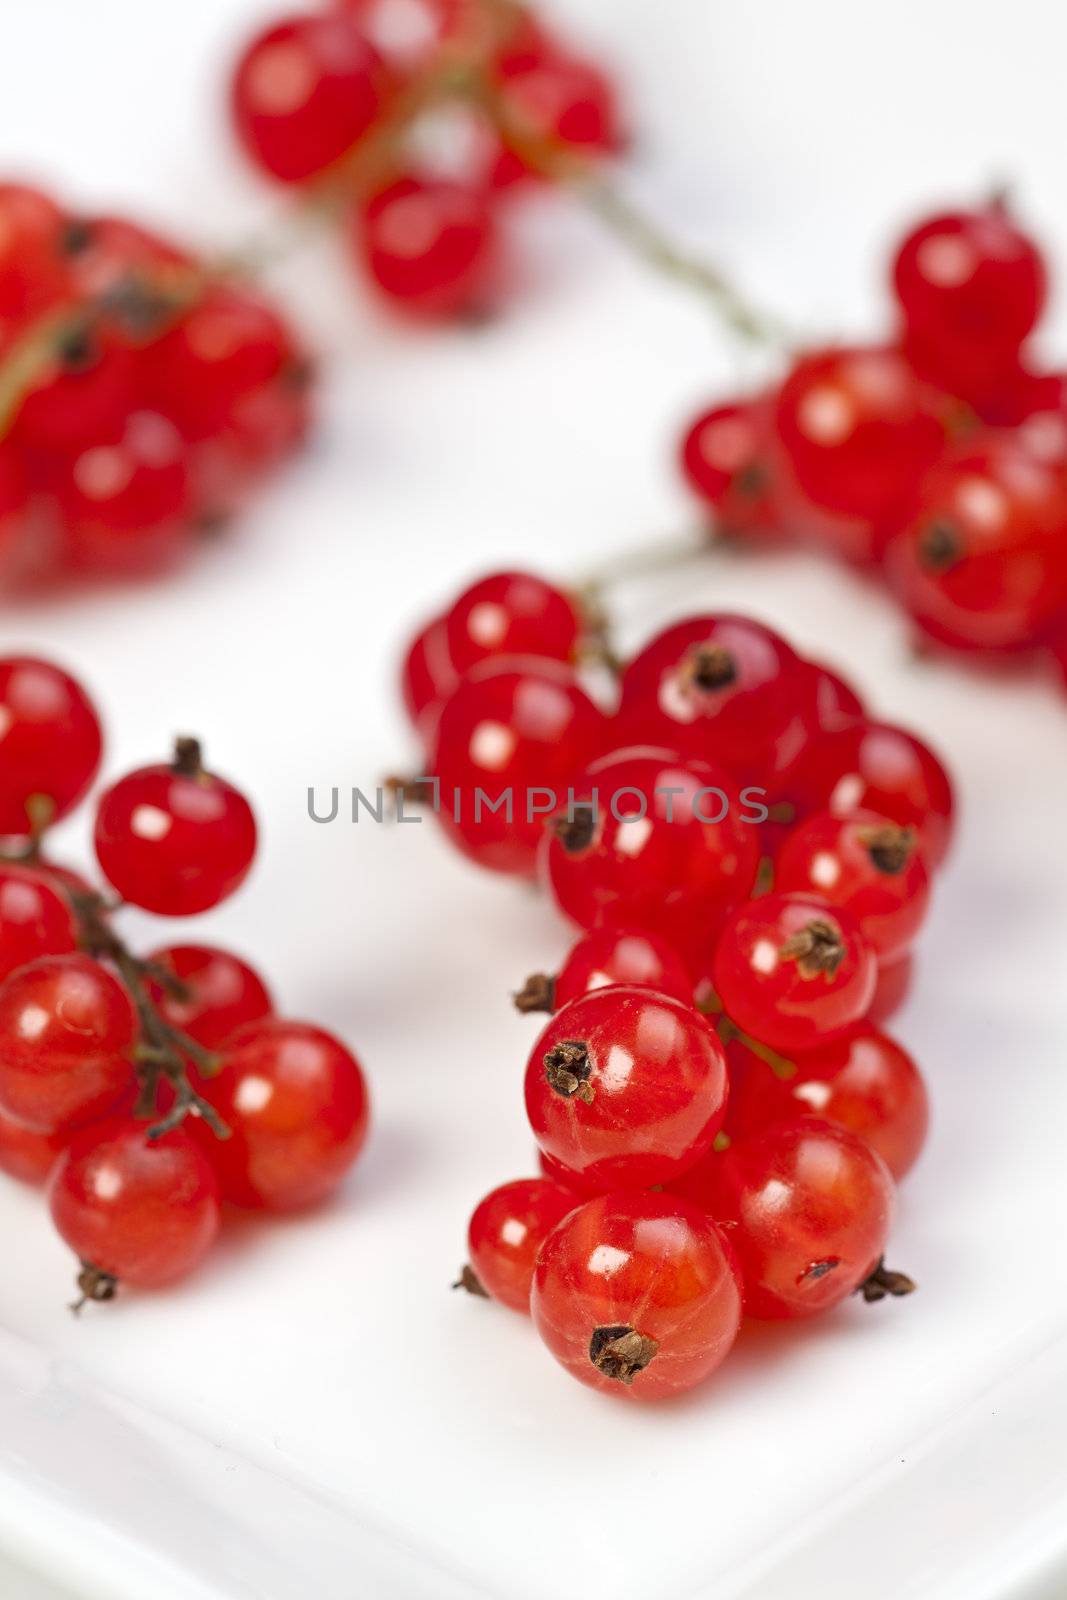 red currant on white background